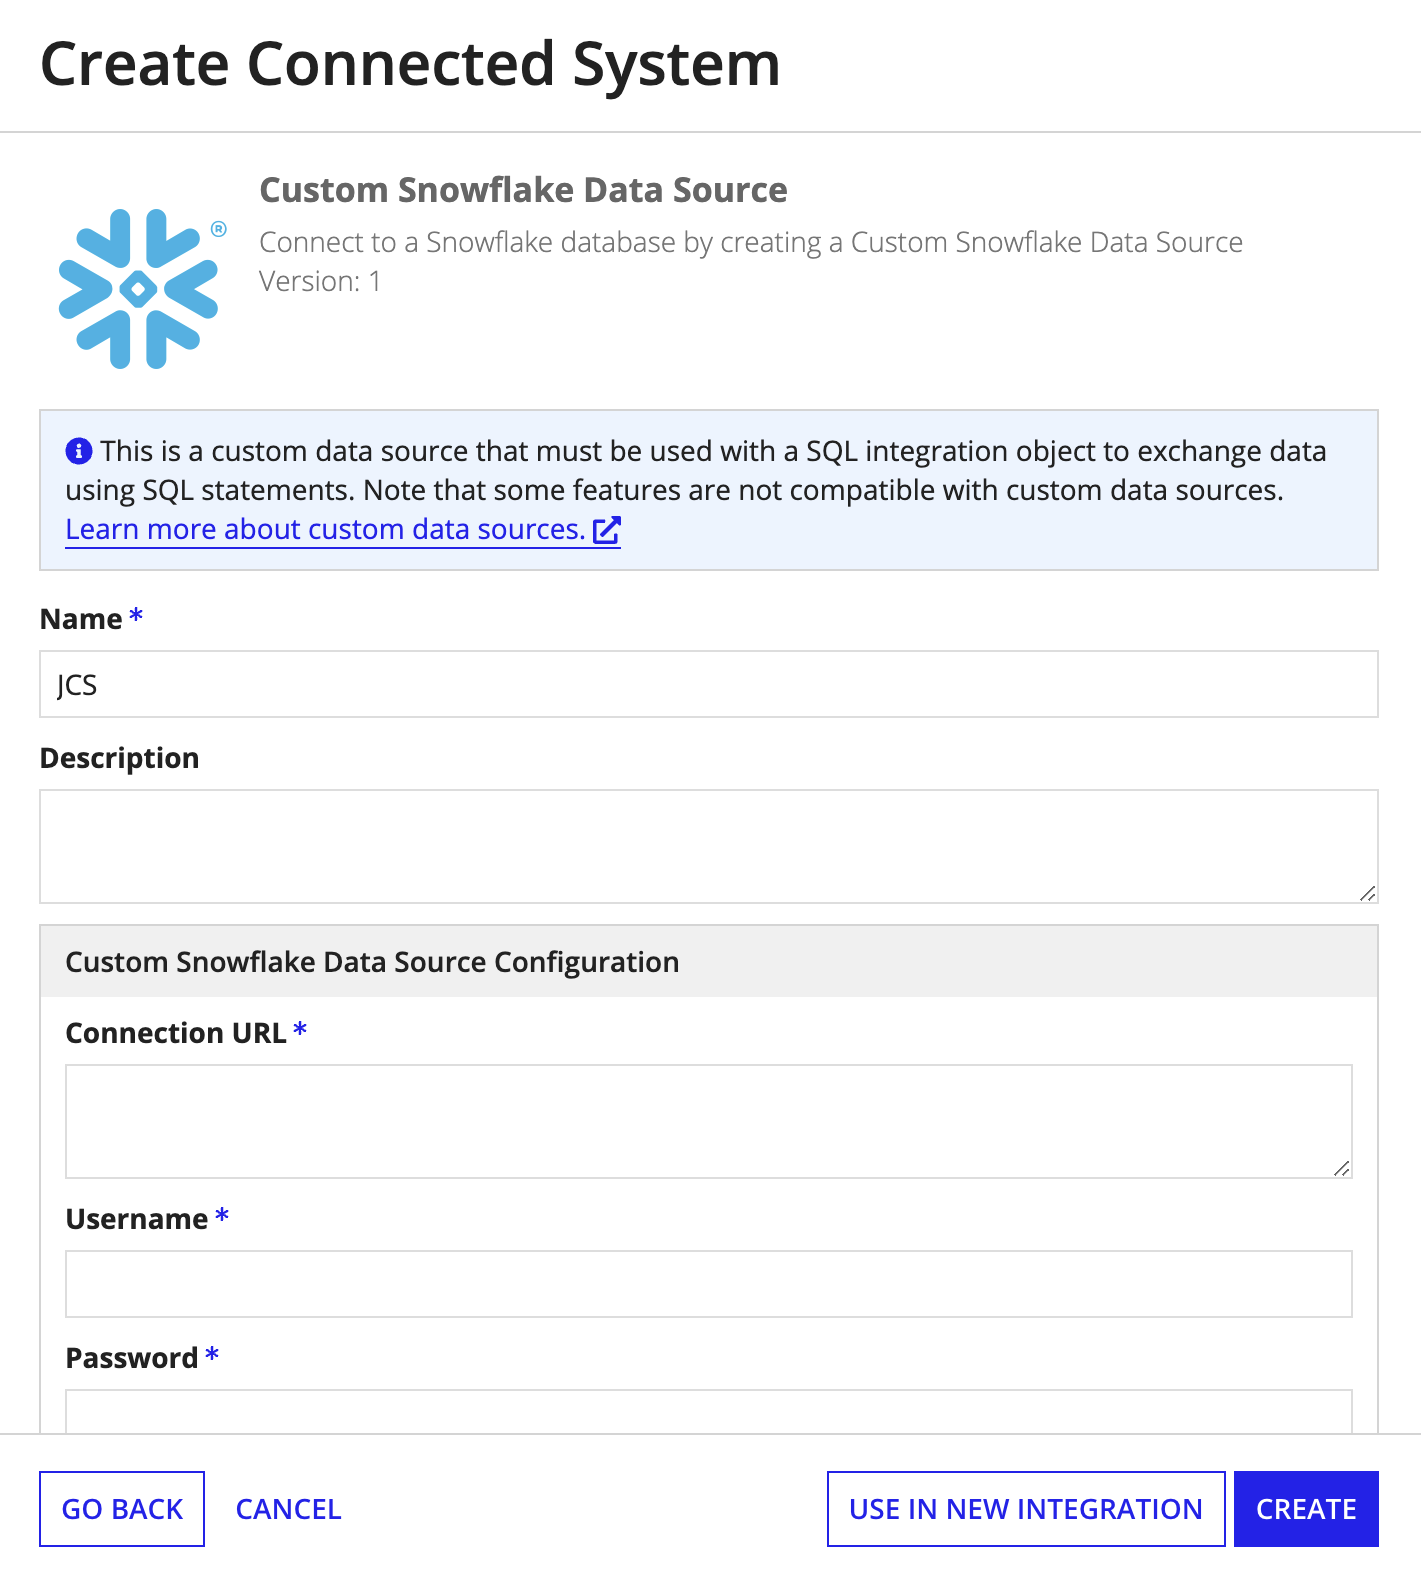 The create new custom JDBC connected system screen